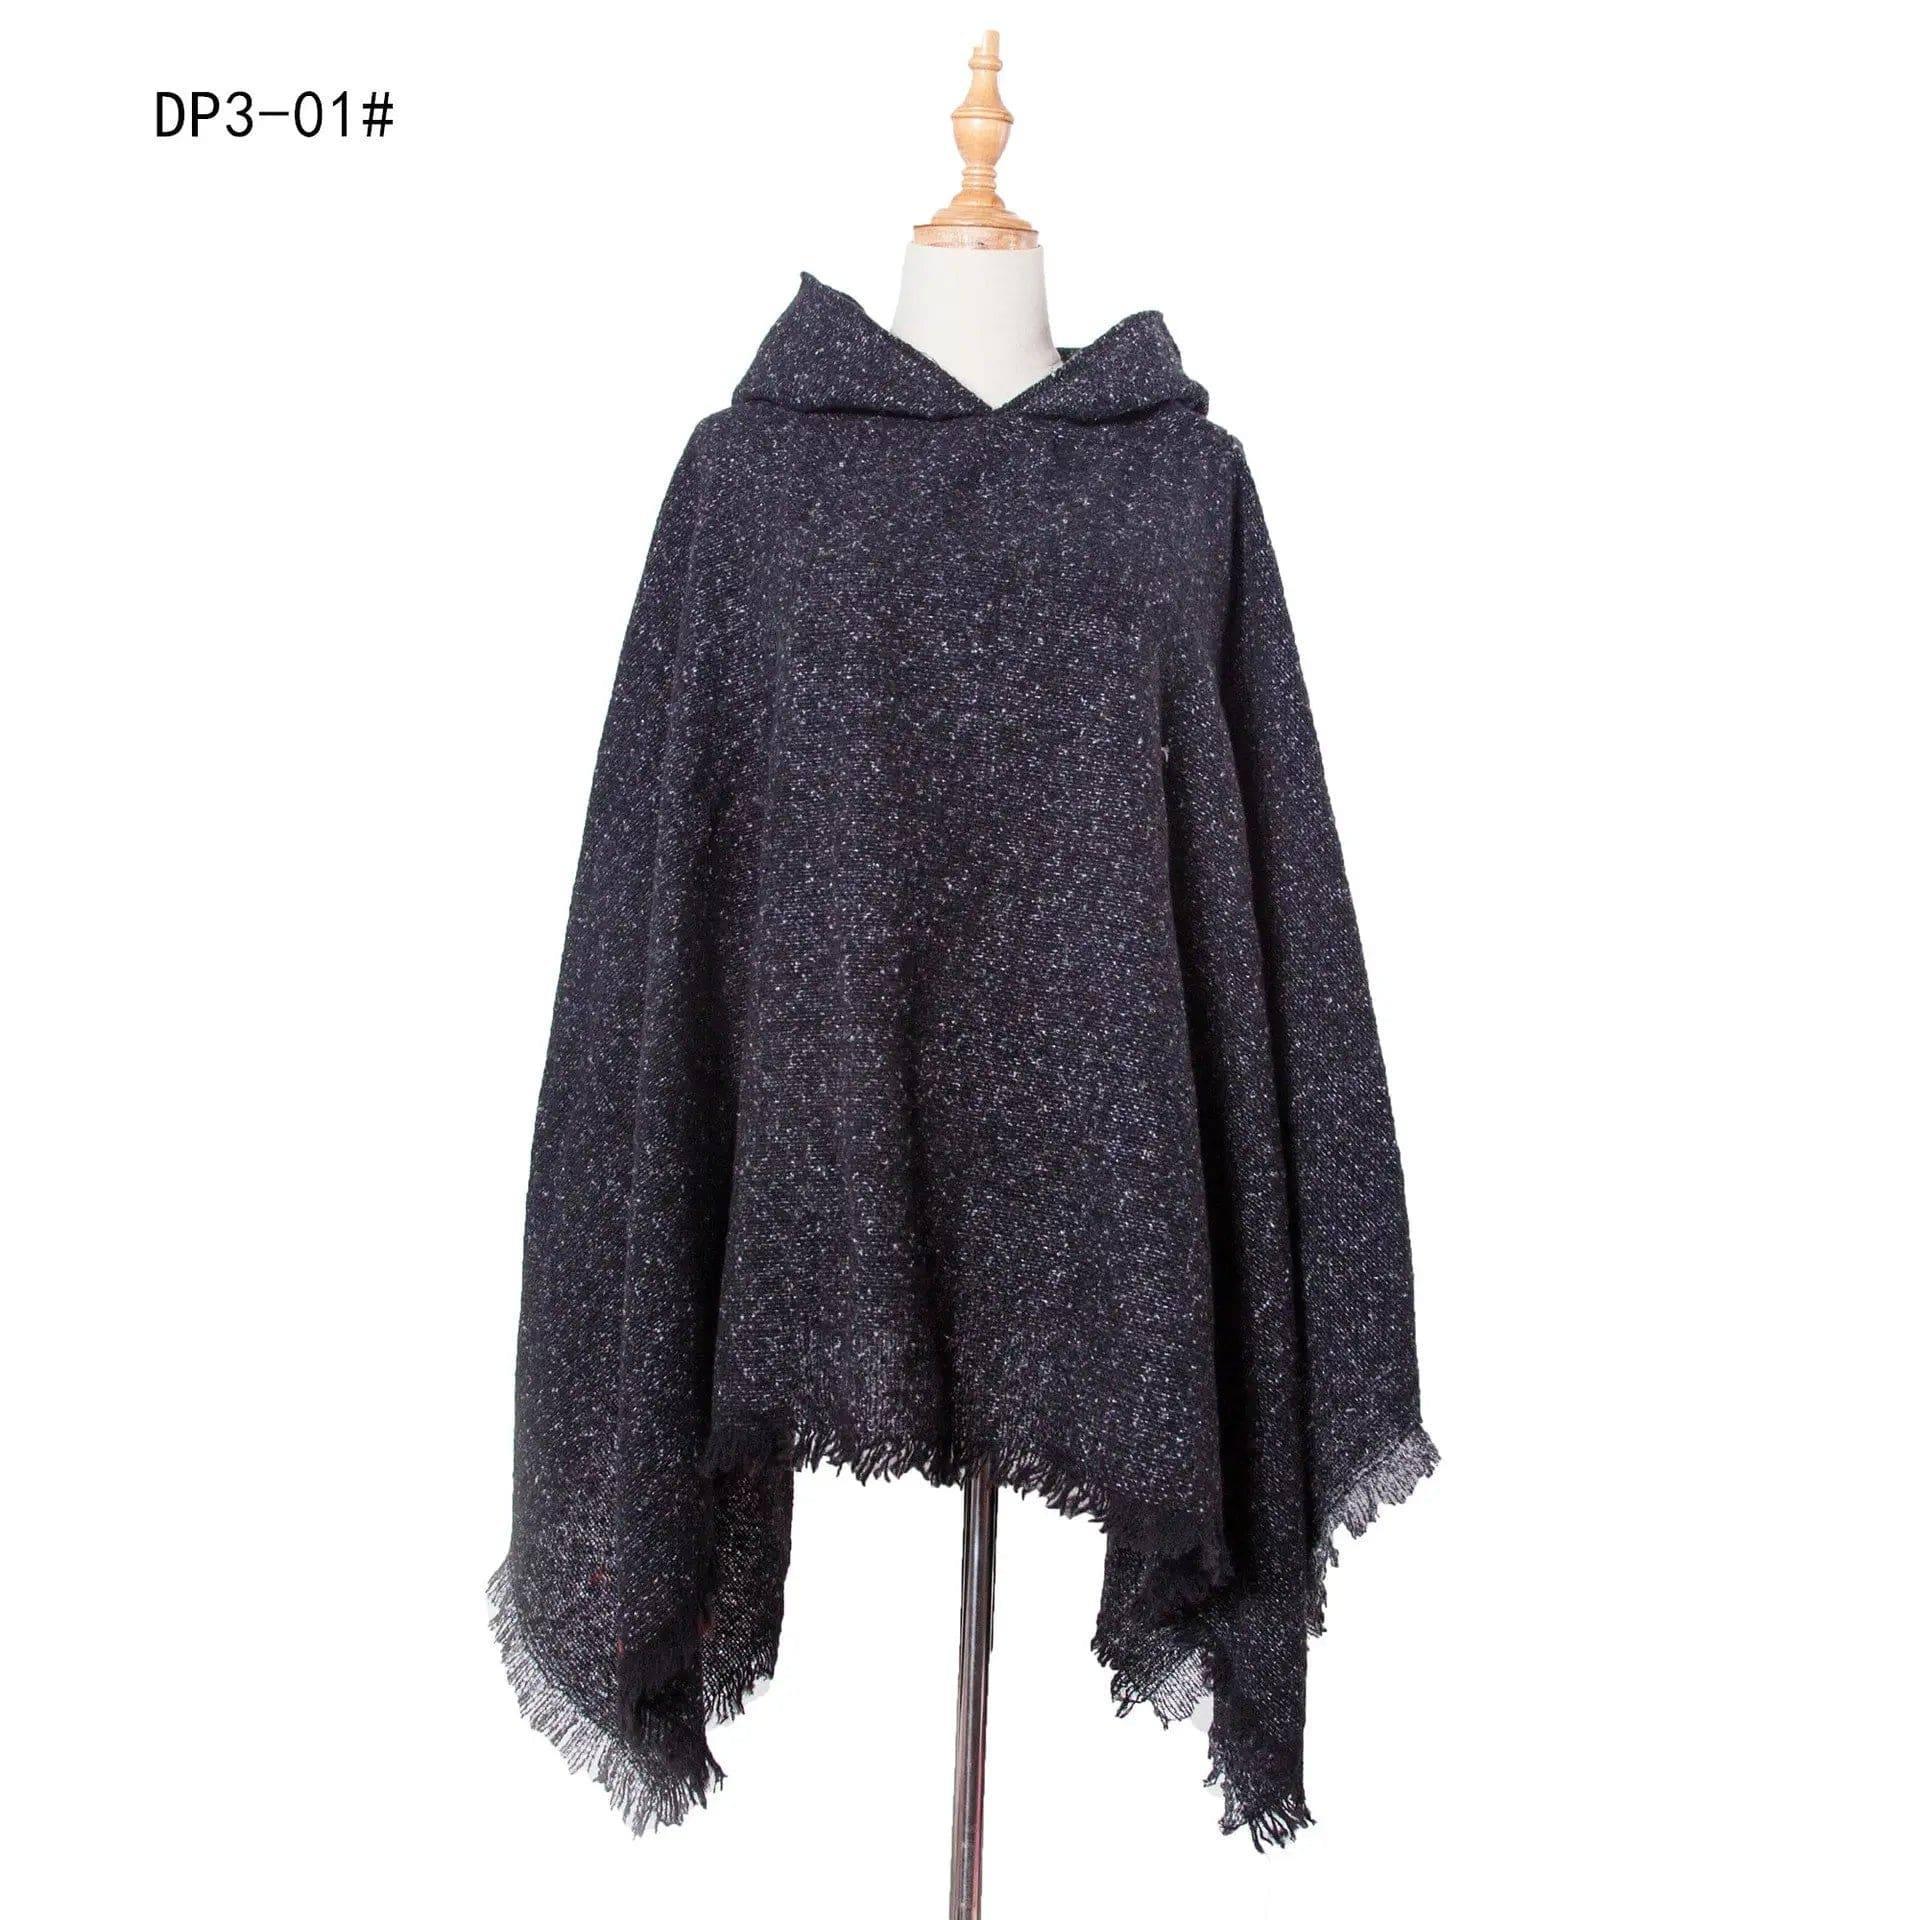 Spring Autumn And Winter Plaid Ribbon Cap Cape And Shawl-DP3 01 Black-32